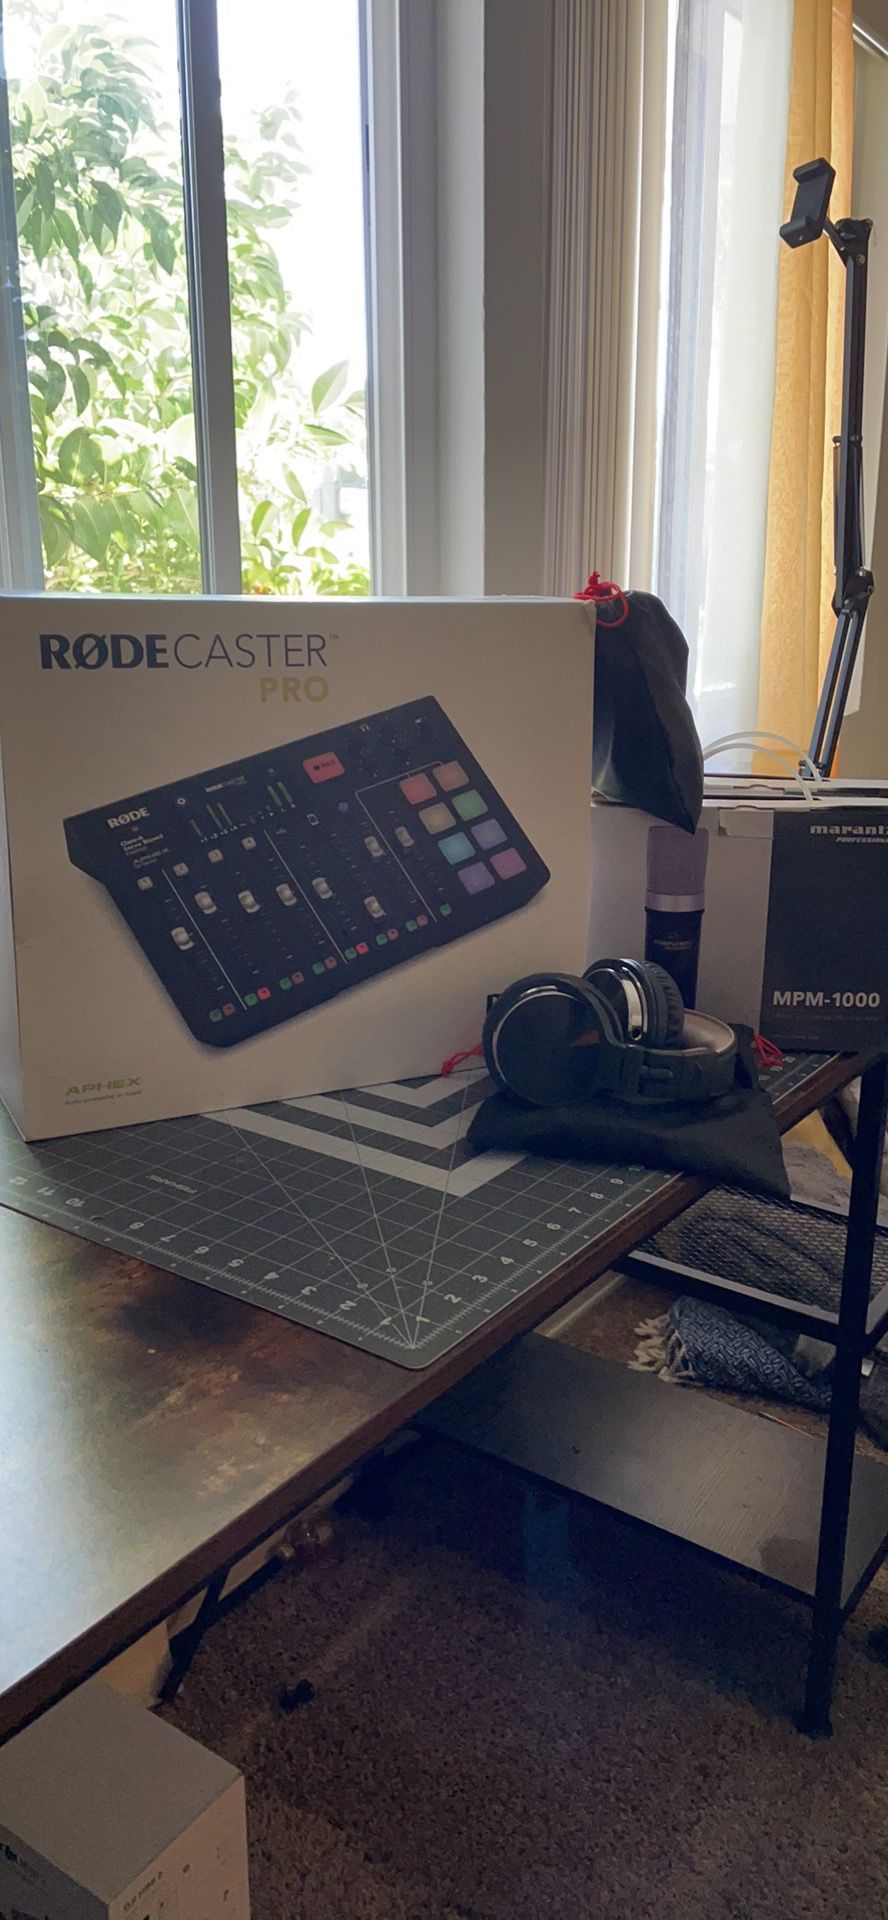 Rode Caster Pro Podcast Equipment 2 Person 